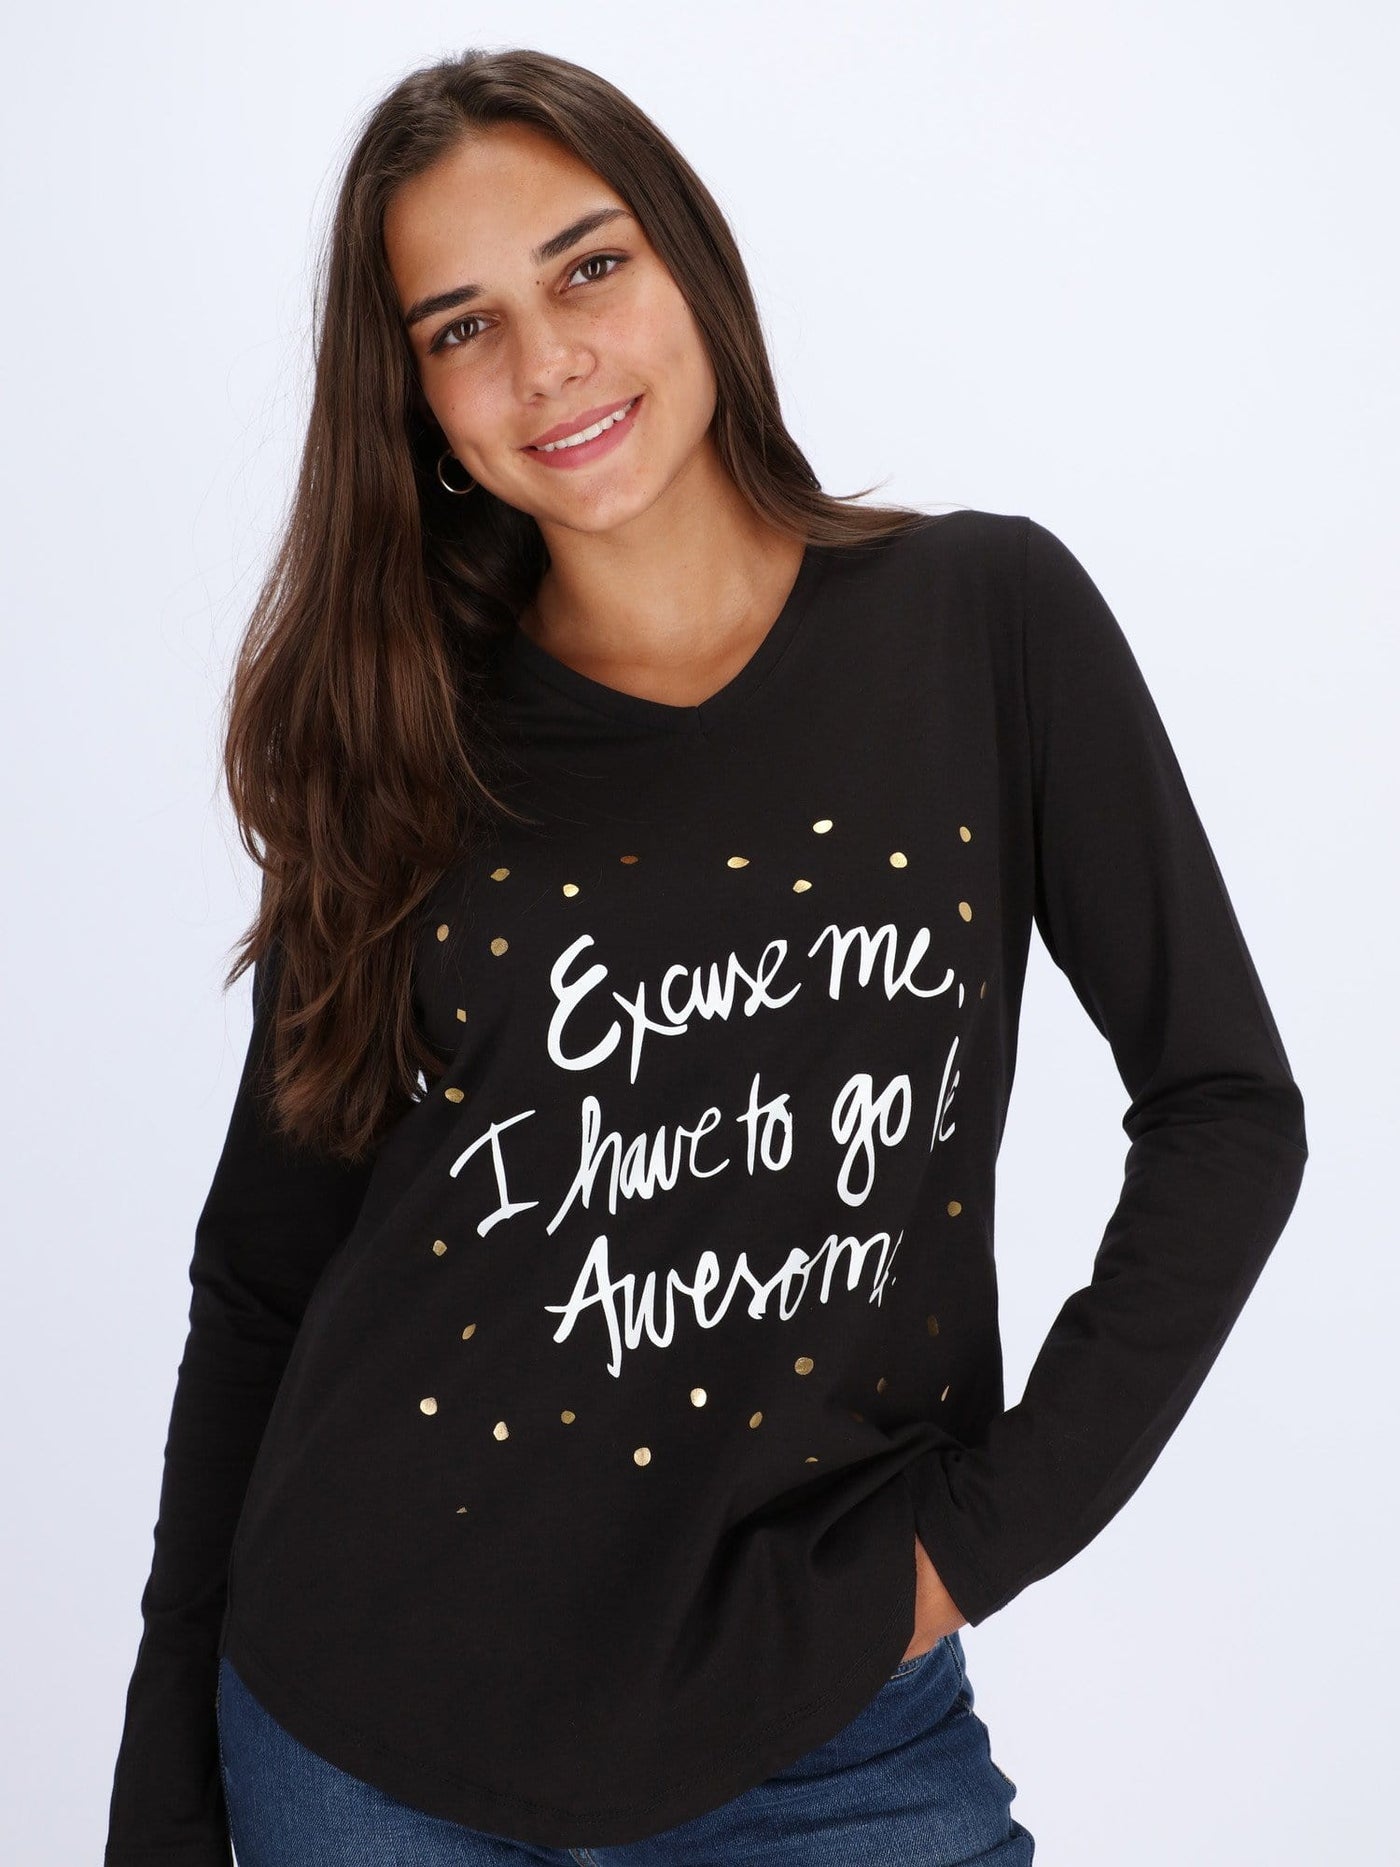 OR Tops & Blouses I have to Go Awesome Text Printed V-Neck T-shirt